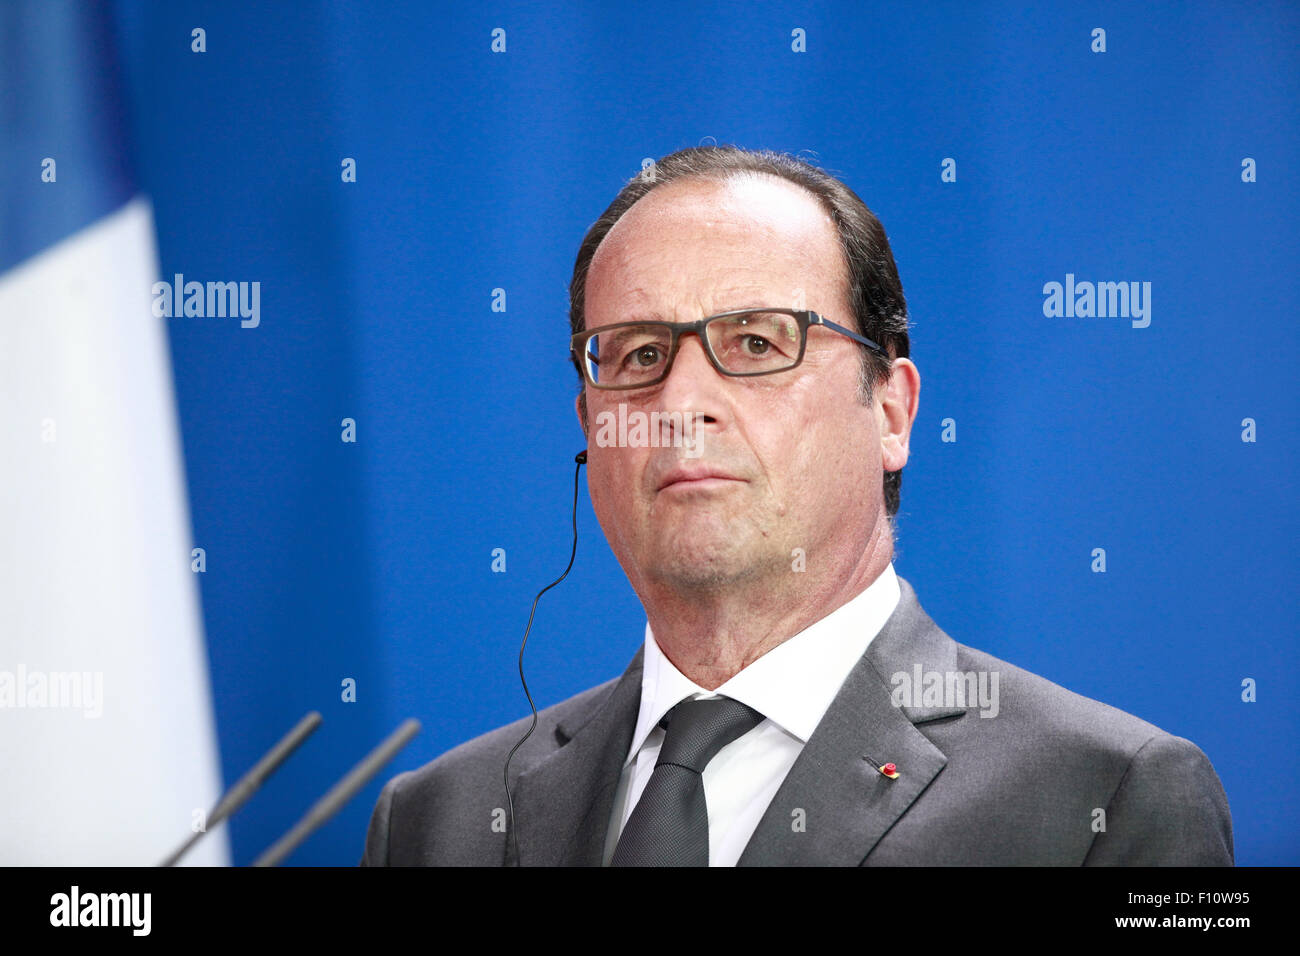 Berlin, Germany. 24th Aug, 2015. German Chancellor Angela Merkel, French president François Hollande and Ukrainian president Petro Poroschenko give a joint press conference after meeting at the German Chancellery in Berlin Germany on 24 August 2015. / Picture: François Hollande, French president Credit:  Reynaldo Chaib Paganelli/Alamy Live News Stock Photo